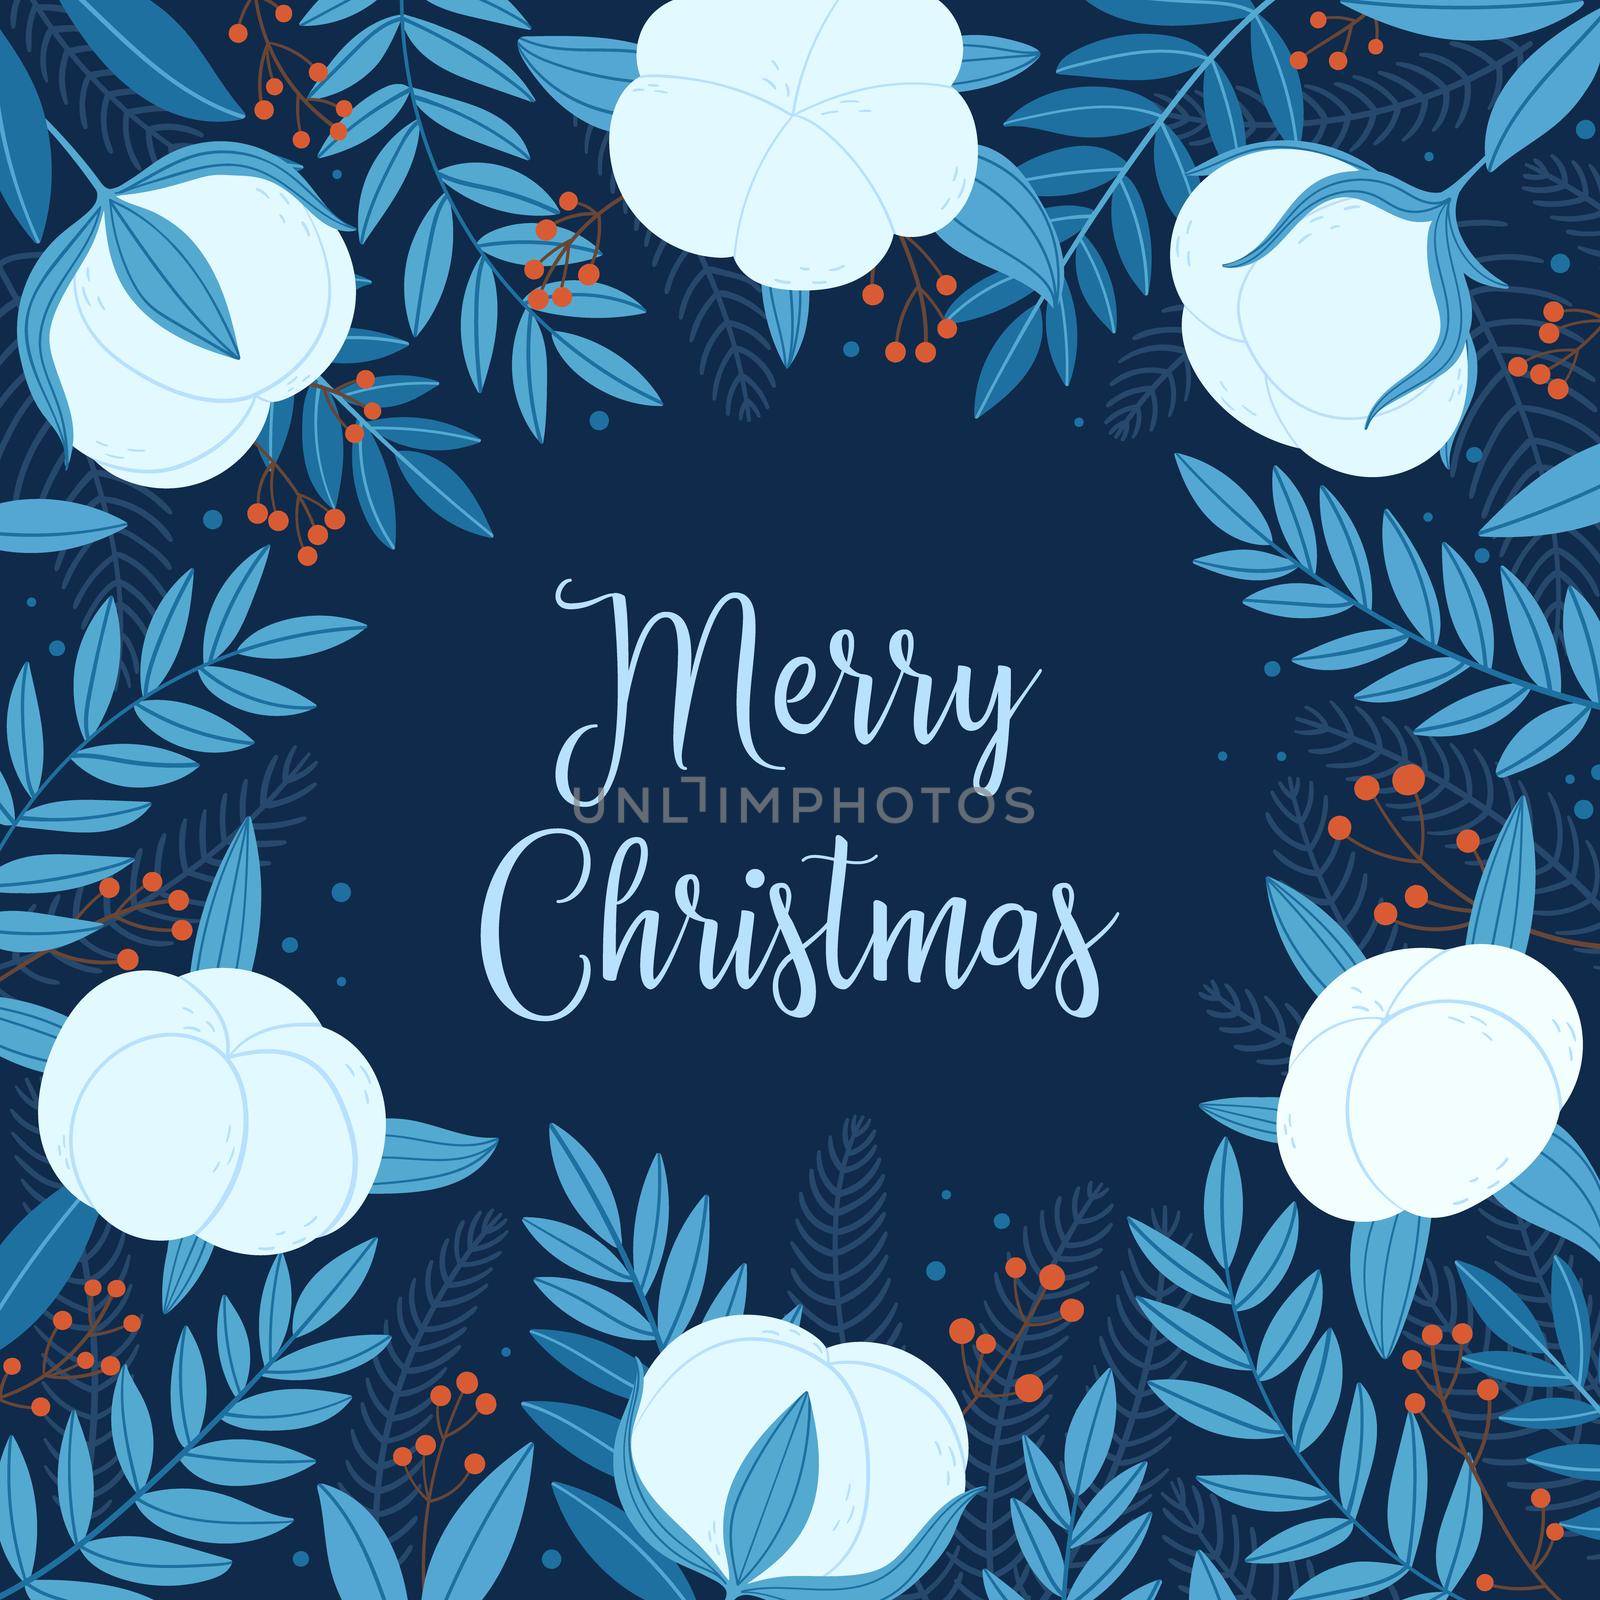 Merry Christmas. Festive card with cotton twigs, fir branches, leaves and berries. Vector illustration on a dark blue background.